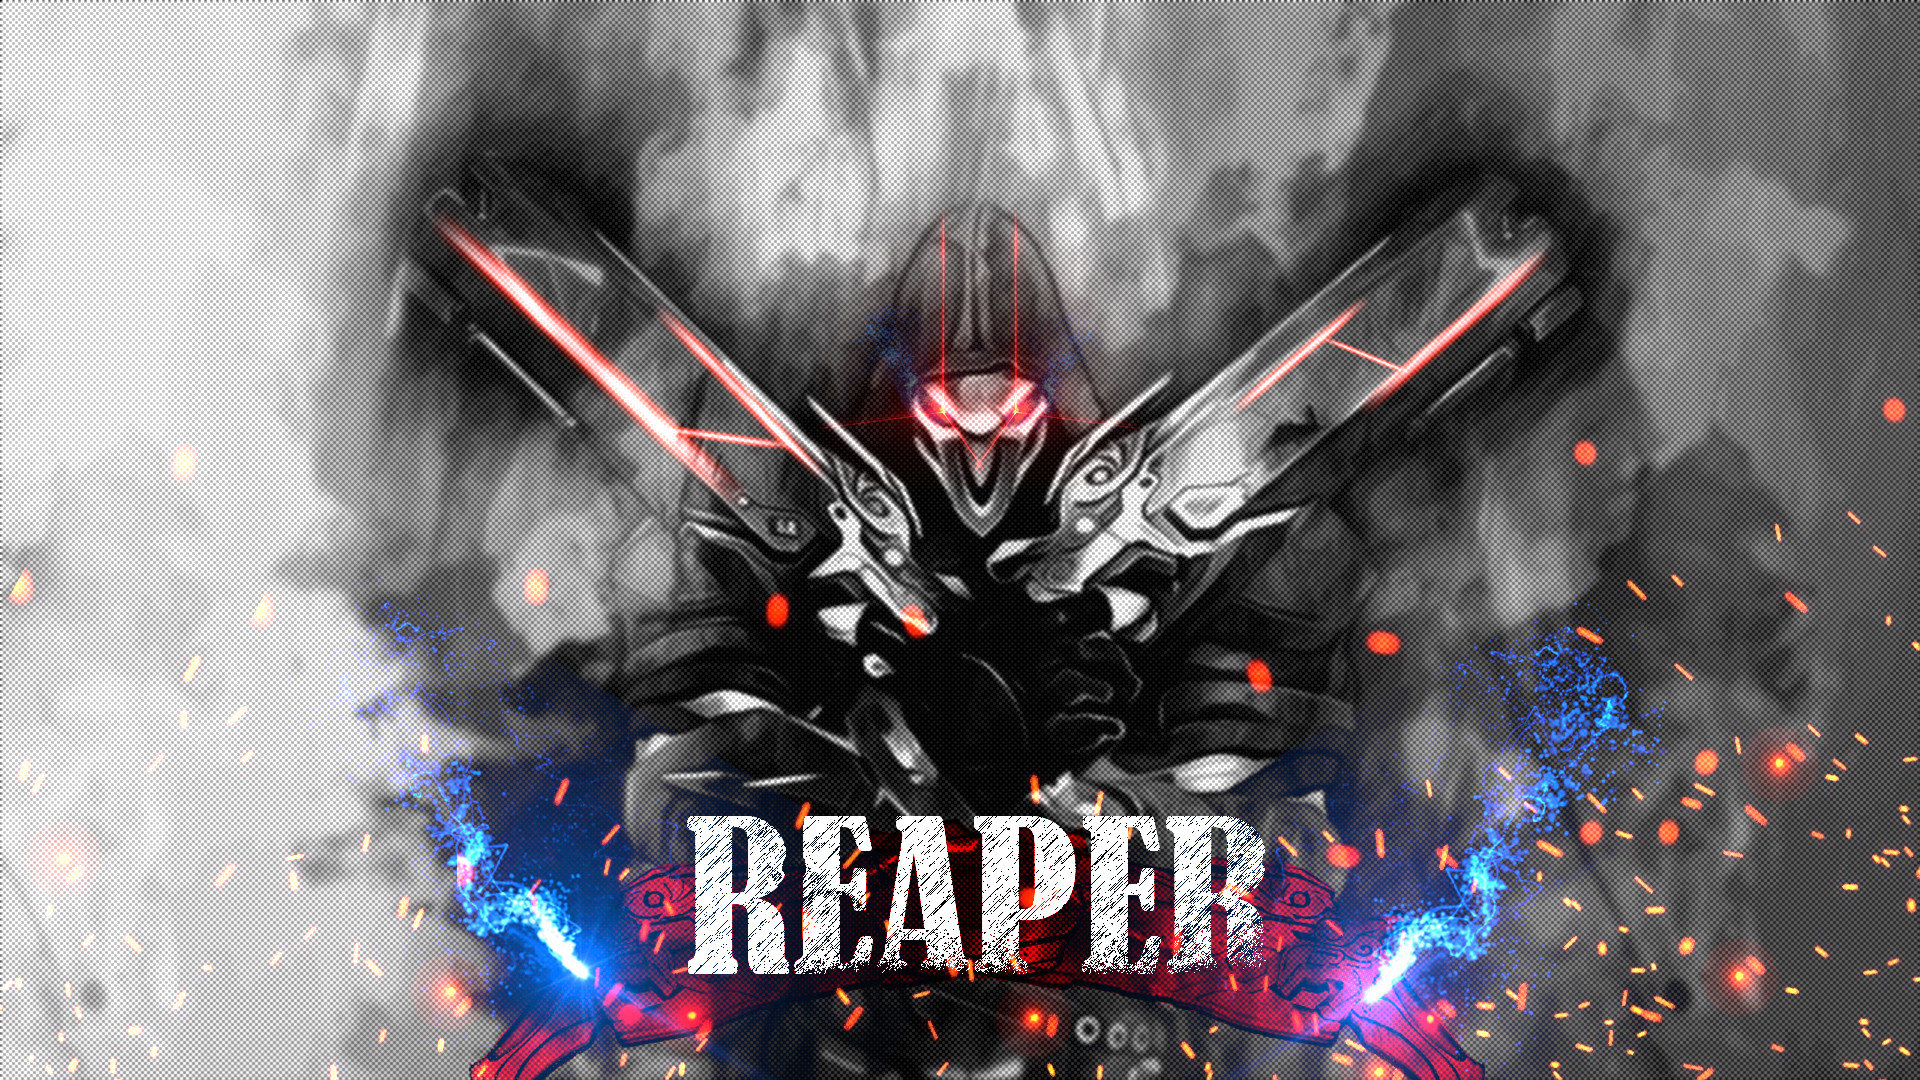 Best Reaper (Overwatch) wallpaper ID:169942 for High Resolution hd 1080p PC